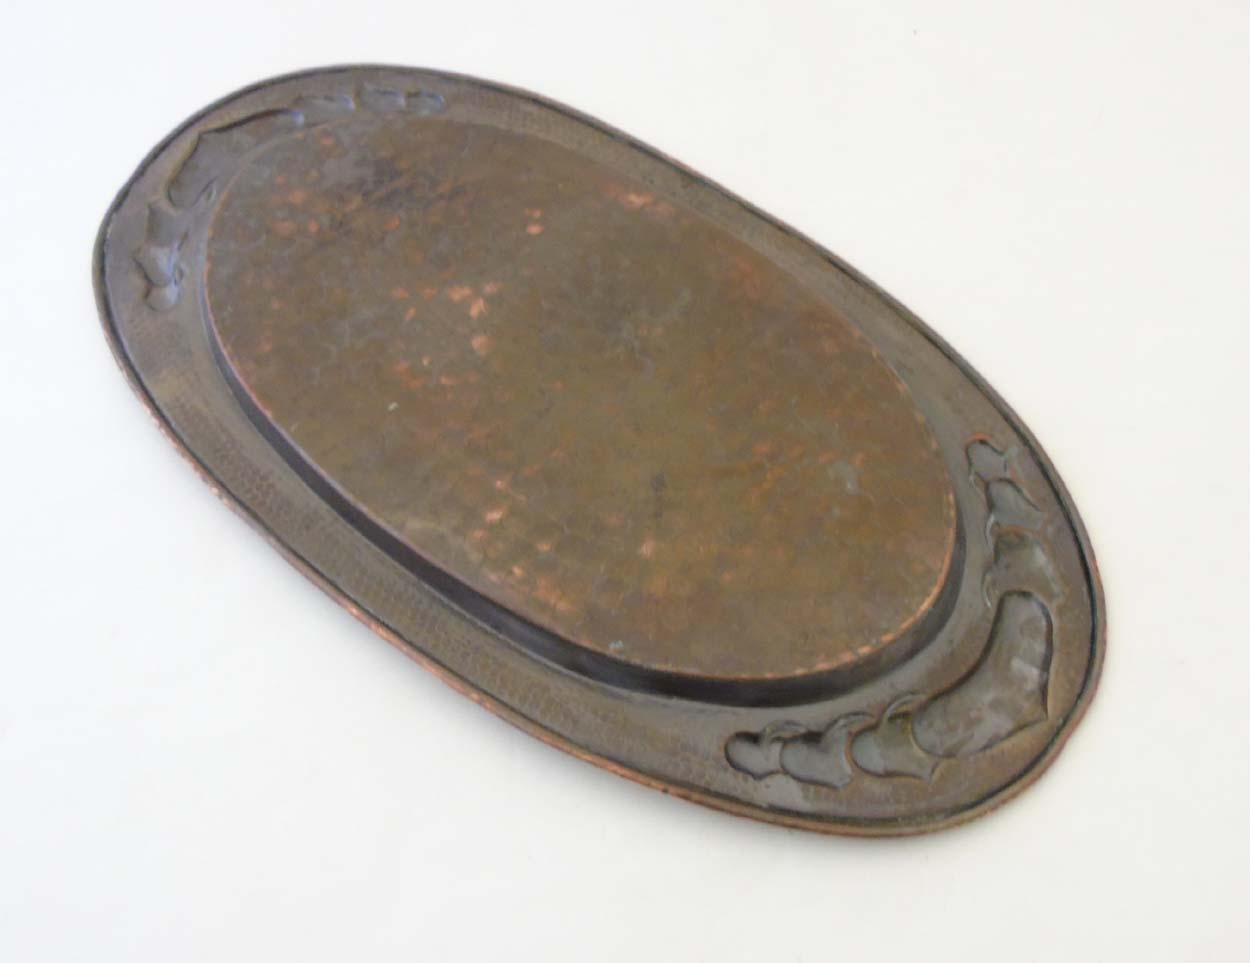 Art and Crafts Decorative metalware : An embossed and plannished large oval butlers tray with heart - Image 7 of 7